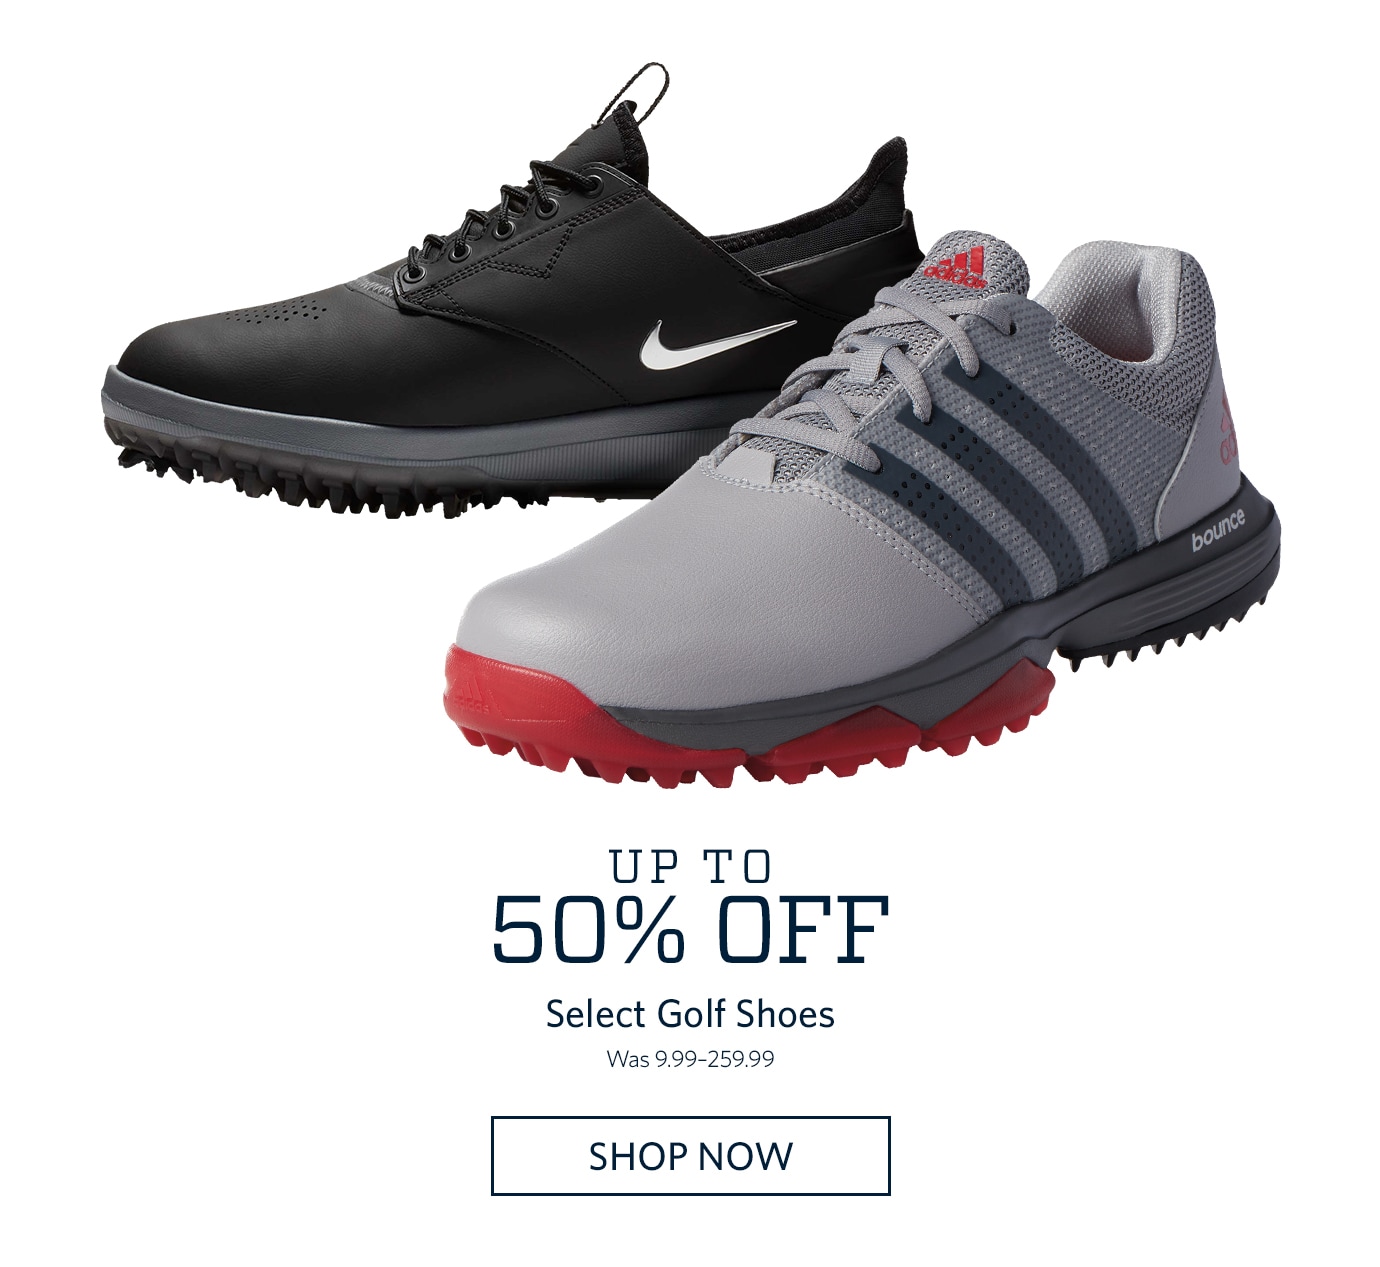 Up to 50% Off Select Golf Shoes | Was 9.99–259.99 | SHOP NOW.